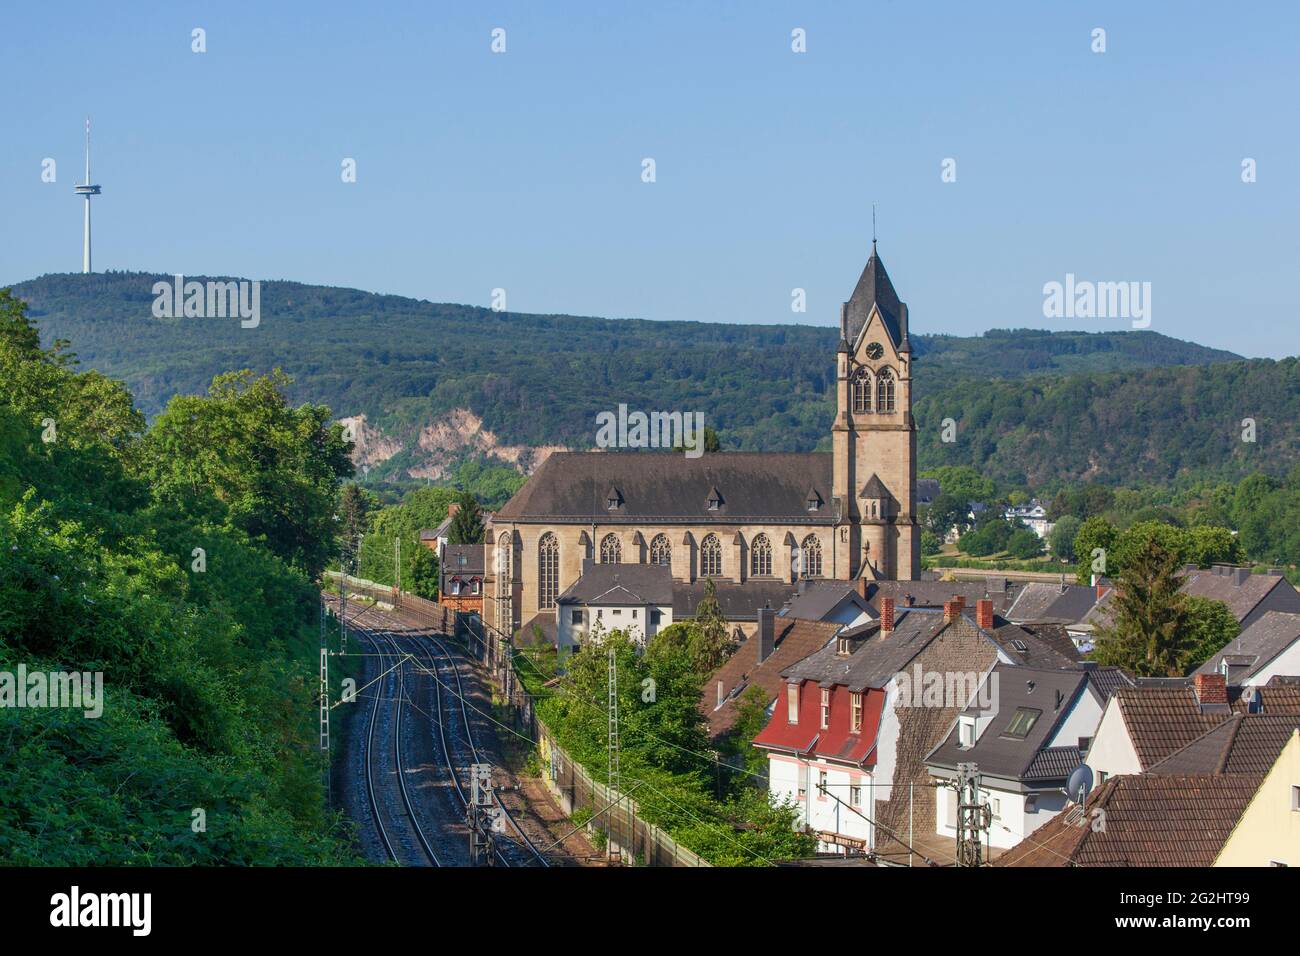 Parish Church of St. Peter and Paul and residential buildings in the Pfaffendorf district, Koblenz, Rhineland-Palatinate, Germany, Europe Stock Photo